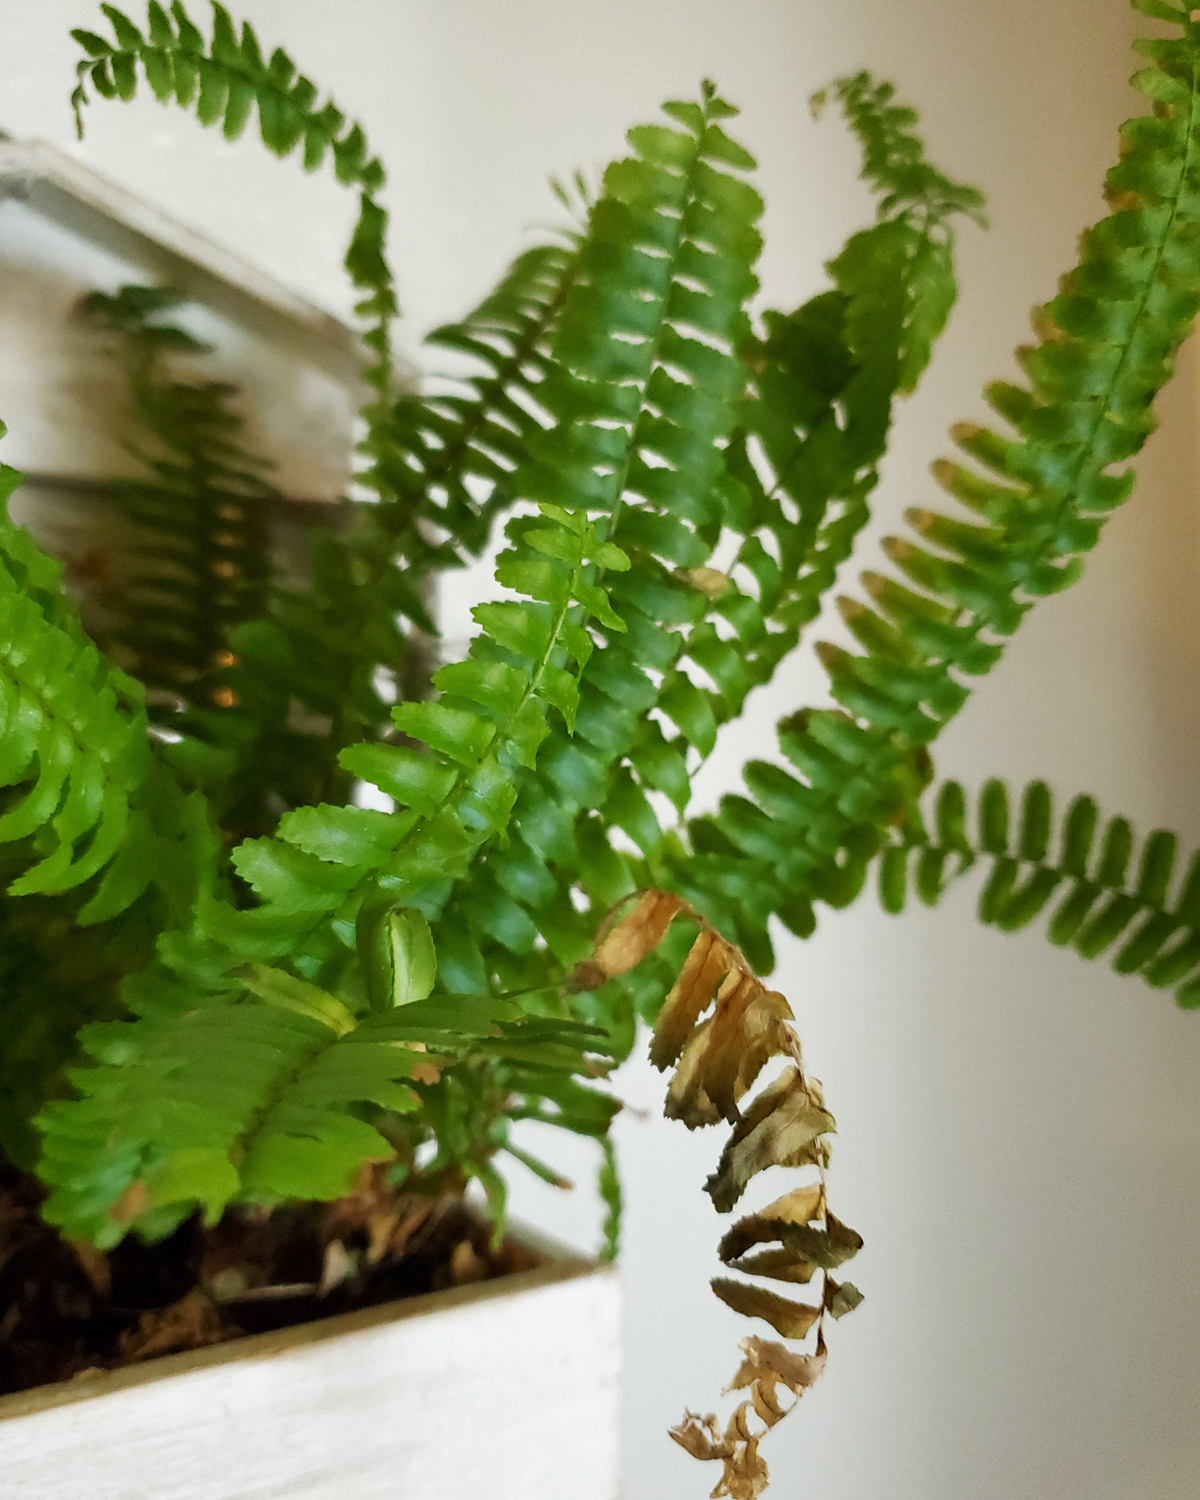 A Boston Fern that needs to be moved to a new pot. Some of the leaf tips are beginning to brown